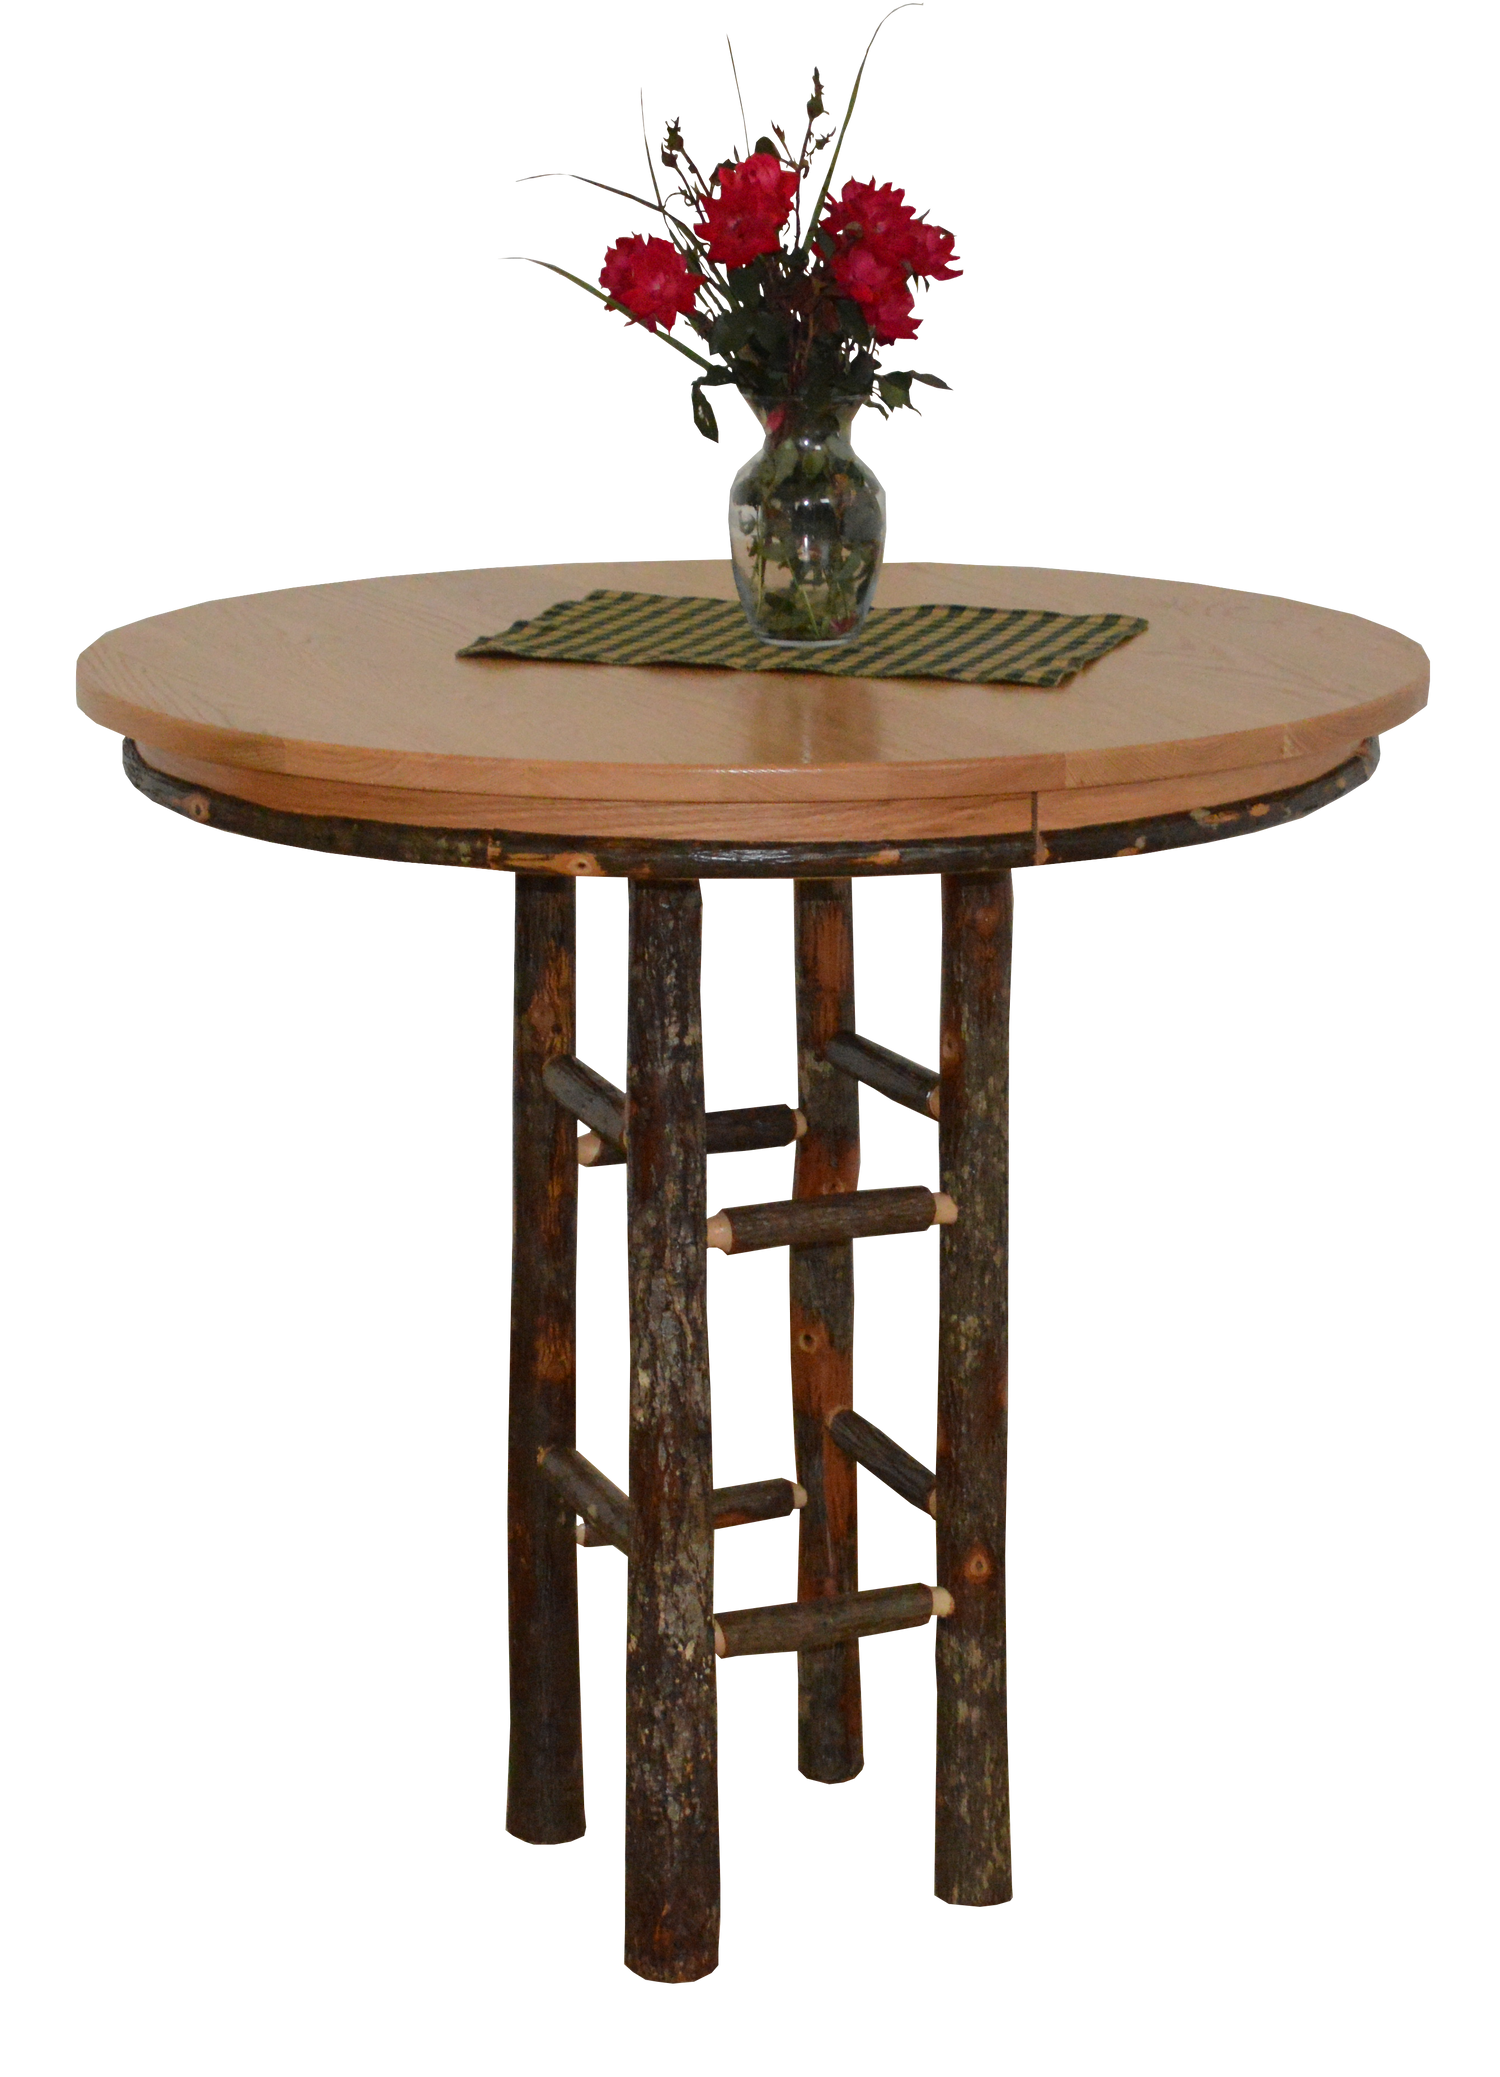 A&L Furniture Co. Hickory Bar Table Collection